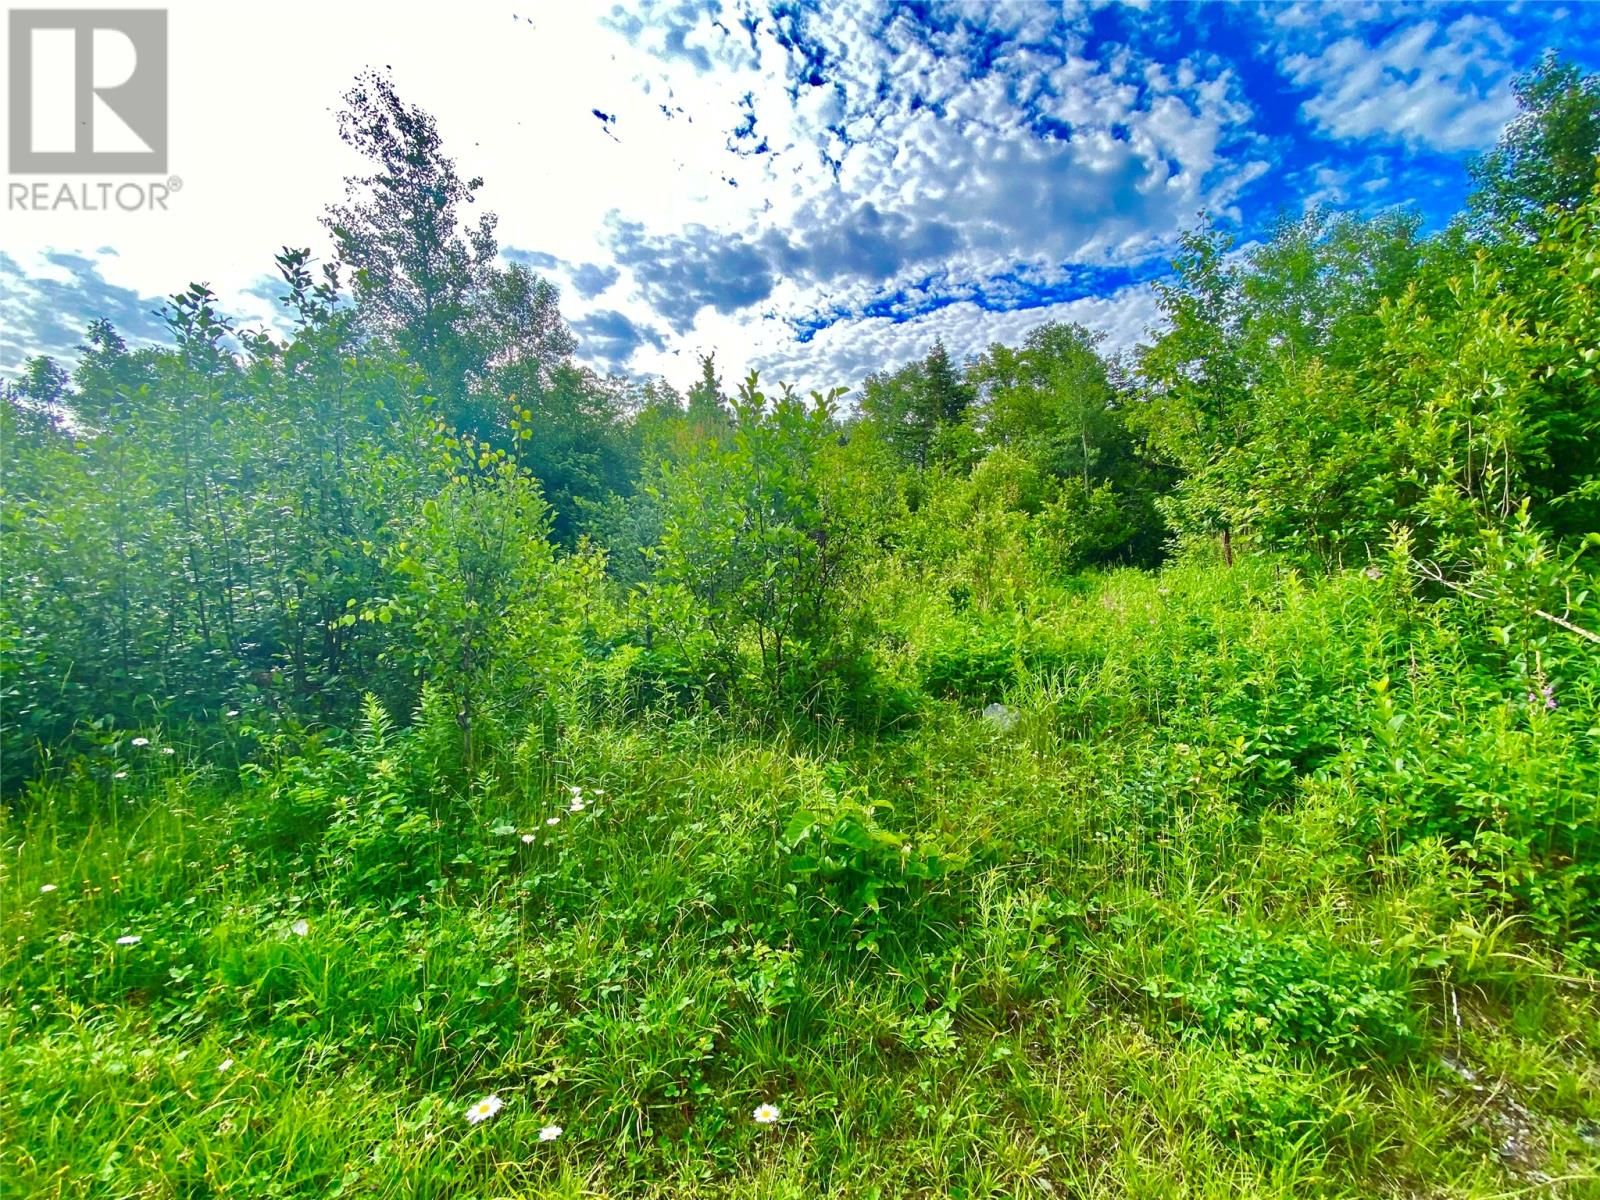 Main Photo: 0 Road to the Isles in Lewsiporte: Vacant Land for sale : MLS®# 1247559